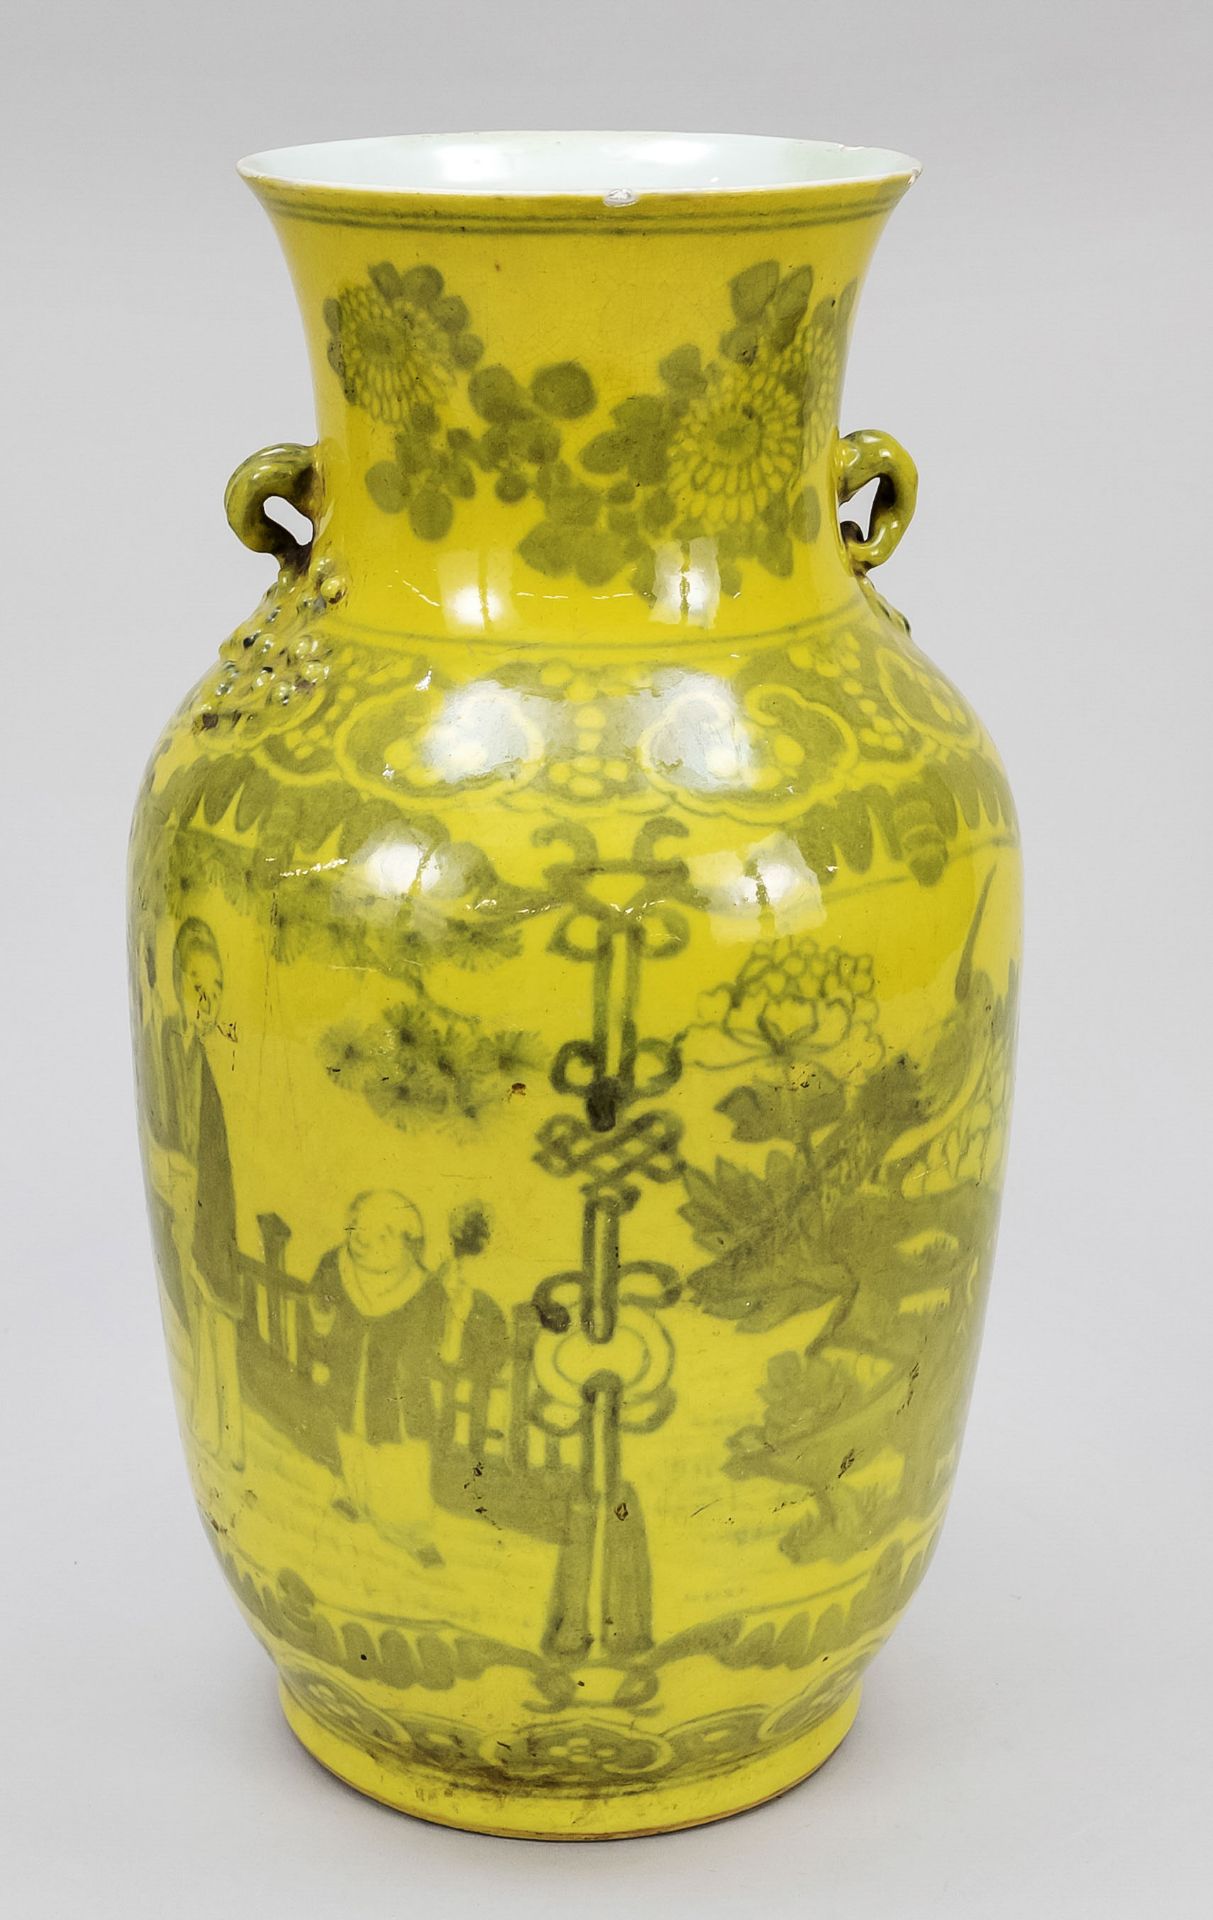 Canary bird vase, China, Qing dynasty(1644-1911), 18th/19th century, cobalt blue painted porcelain - Image 2 of 2